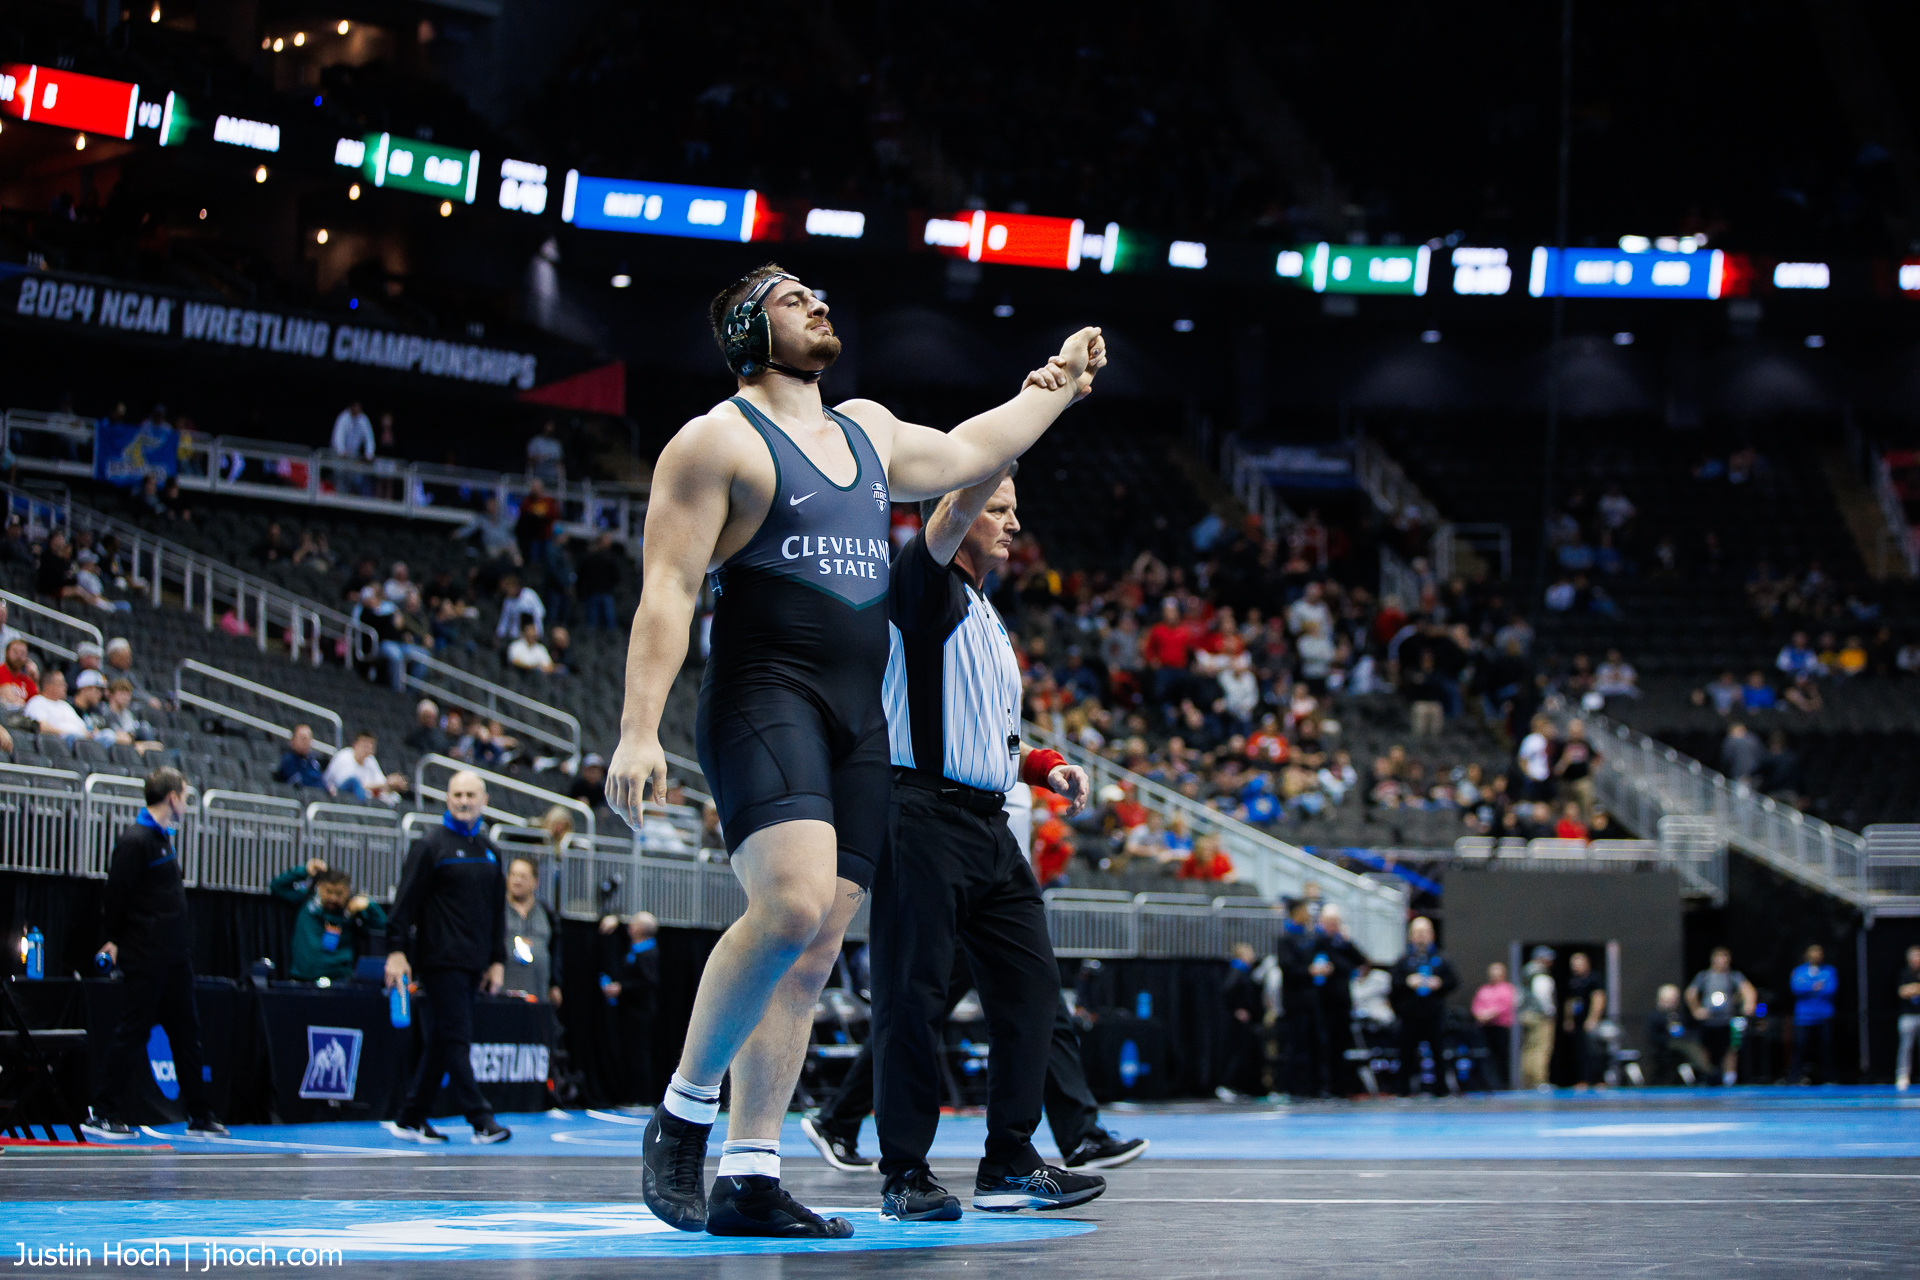 Bucknavich Advances to Day Two of the NCAA Wrestling Championships